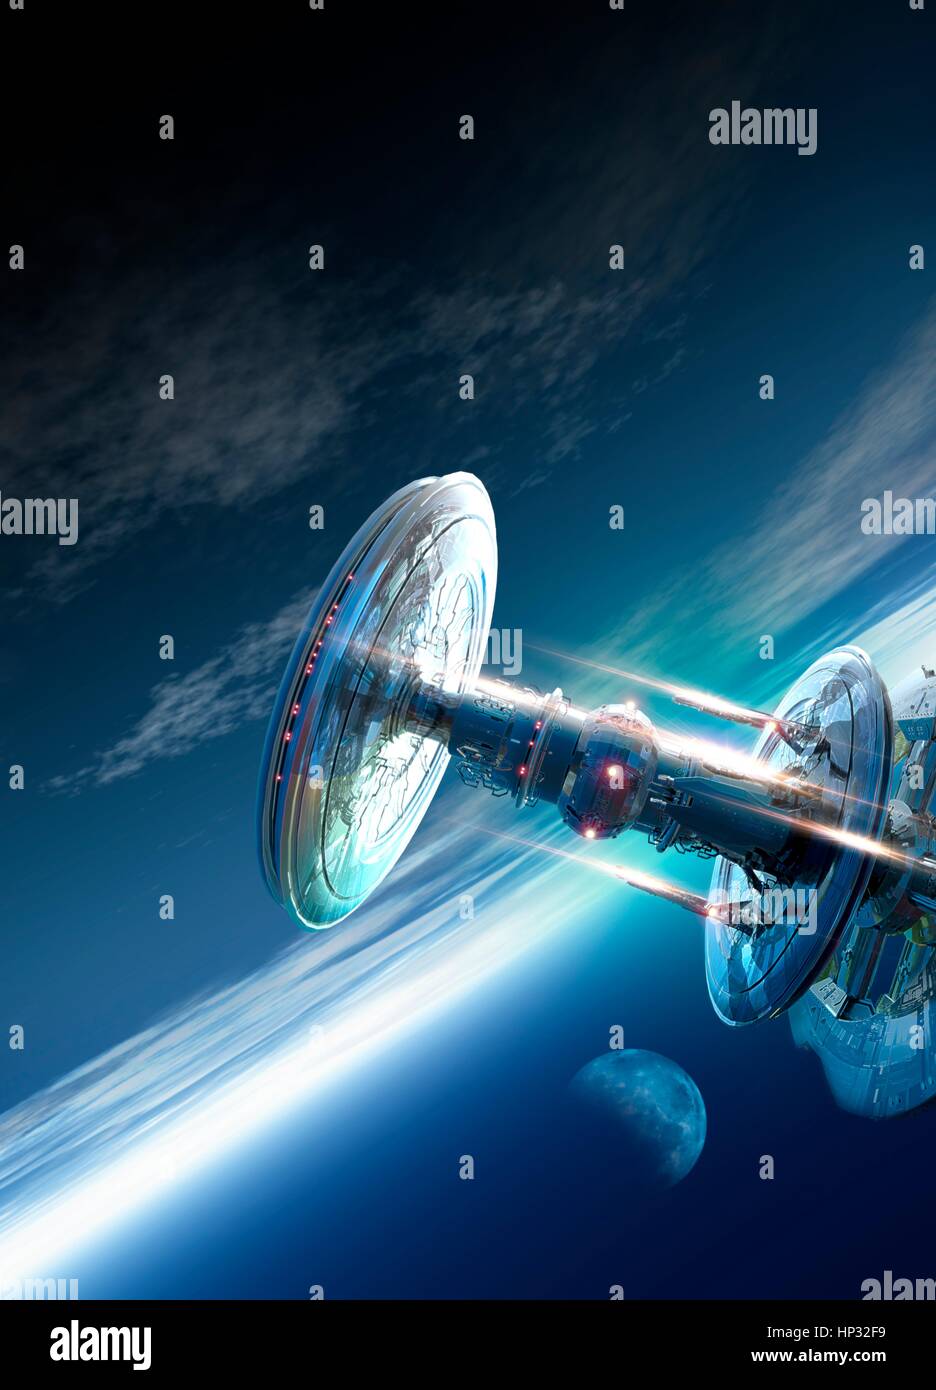 Space craft with planets in background, illustration. Stock Photo